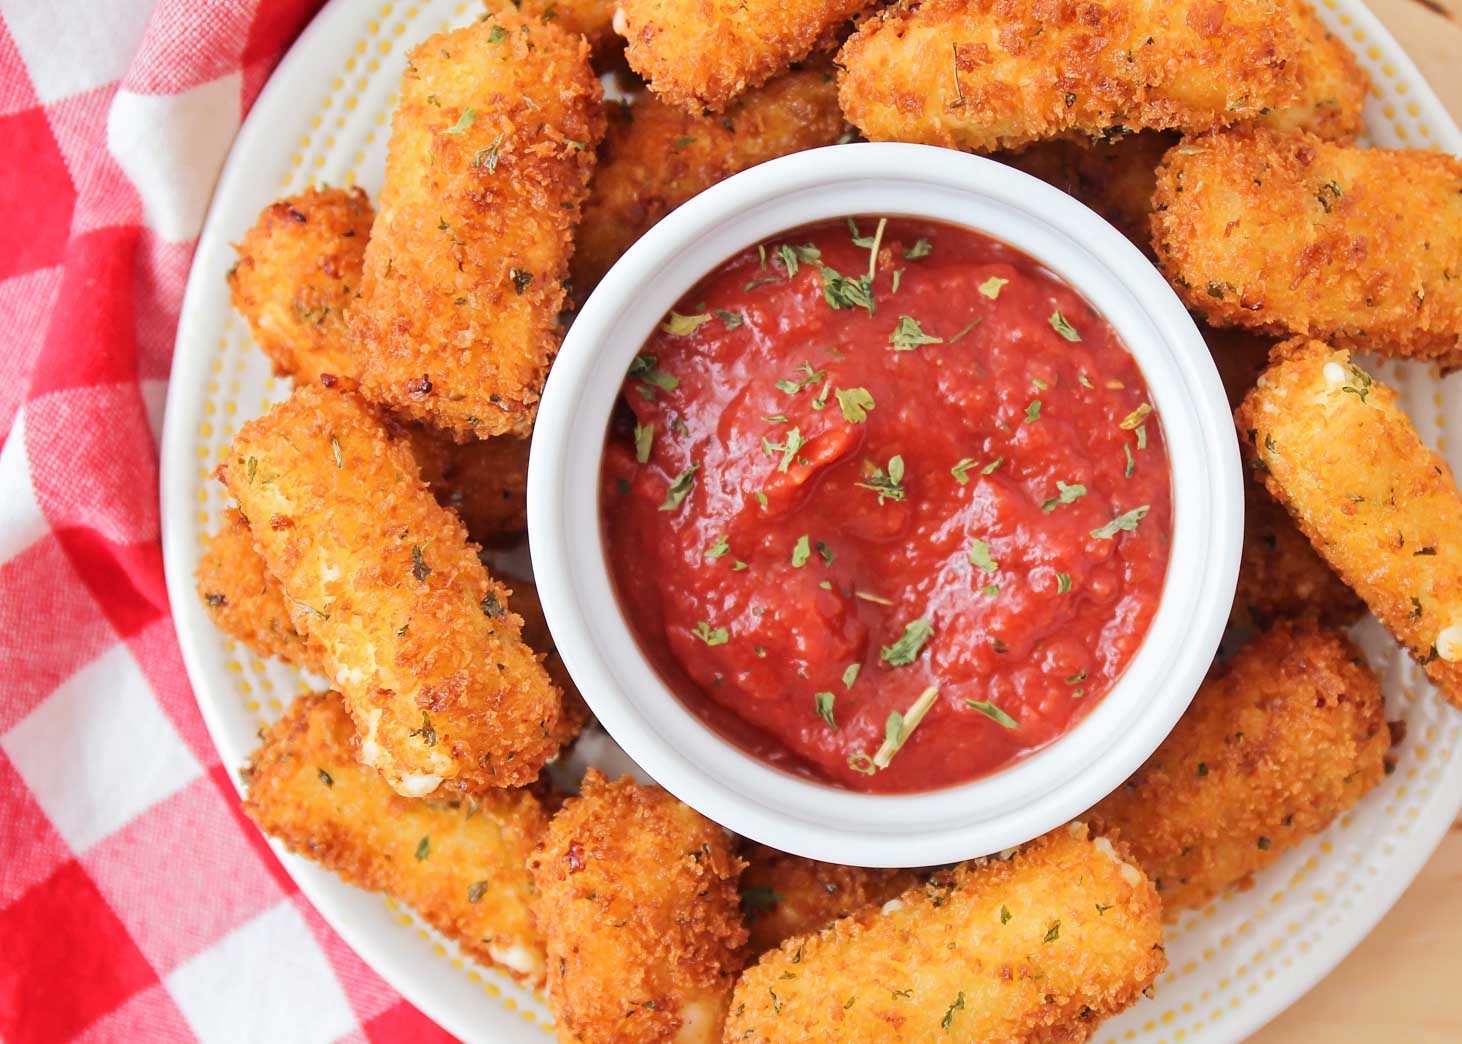 Mozzarella sticks served as a party appetizer with a side of marinara.